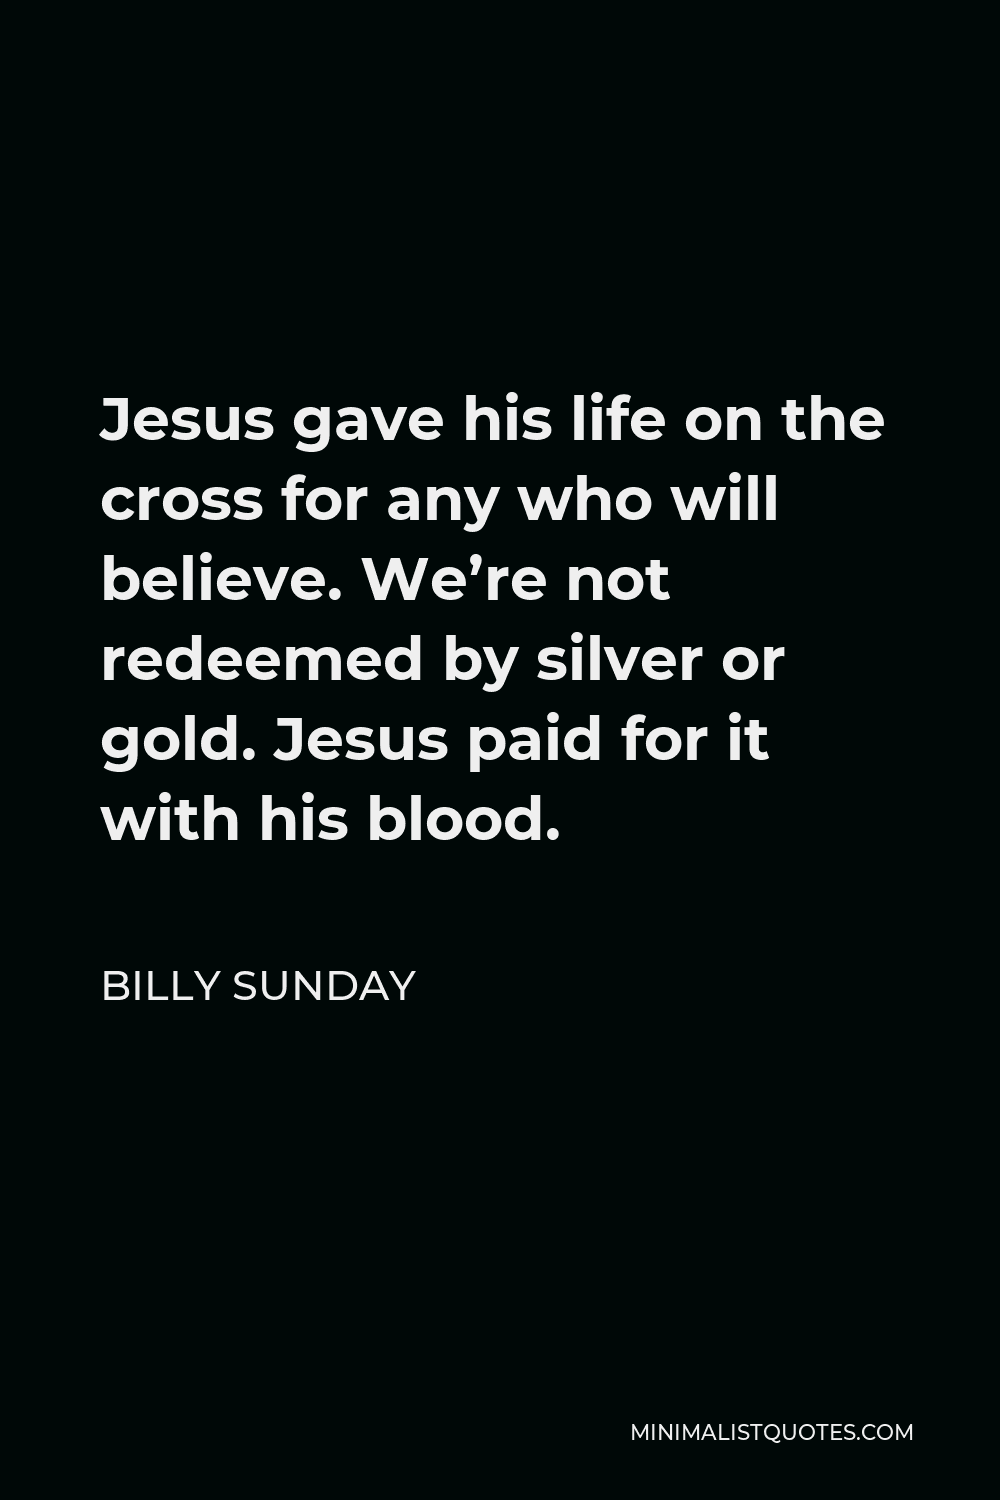 Billy Sunday Quote - Jesus gave his life on the cross for any who will believe. We’re not redeemed by silver or gold. Jesus paid for it with his blood.